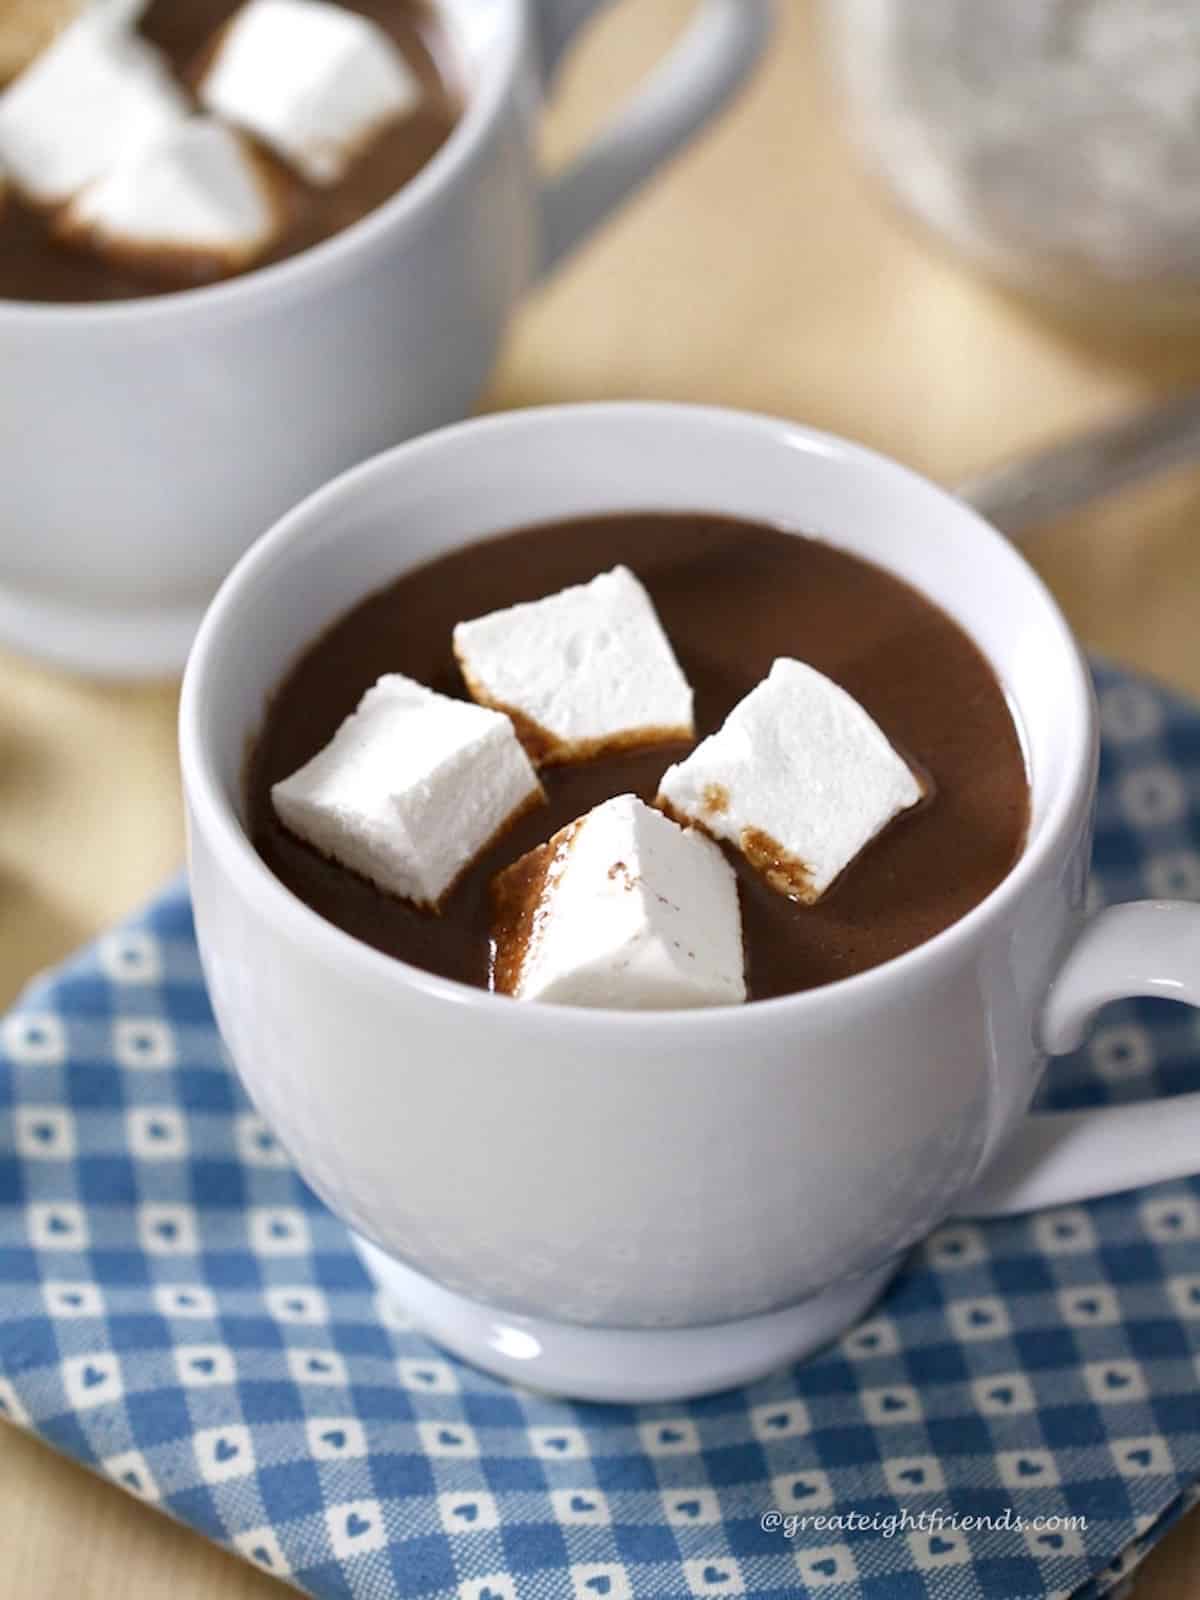 Homemade hot chocolate in a white mug with four white square marshmallows floating on top